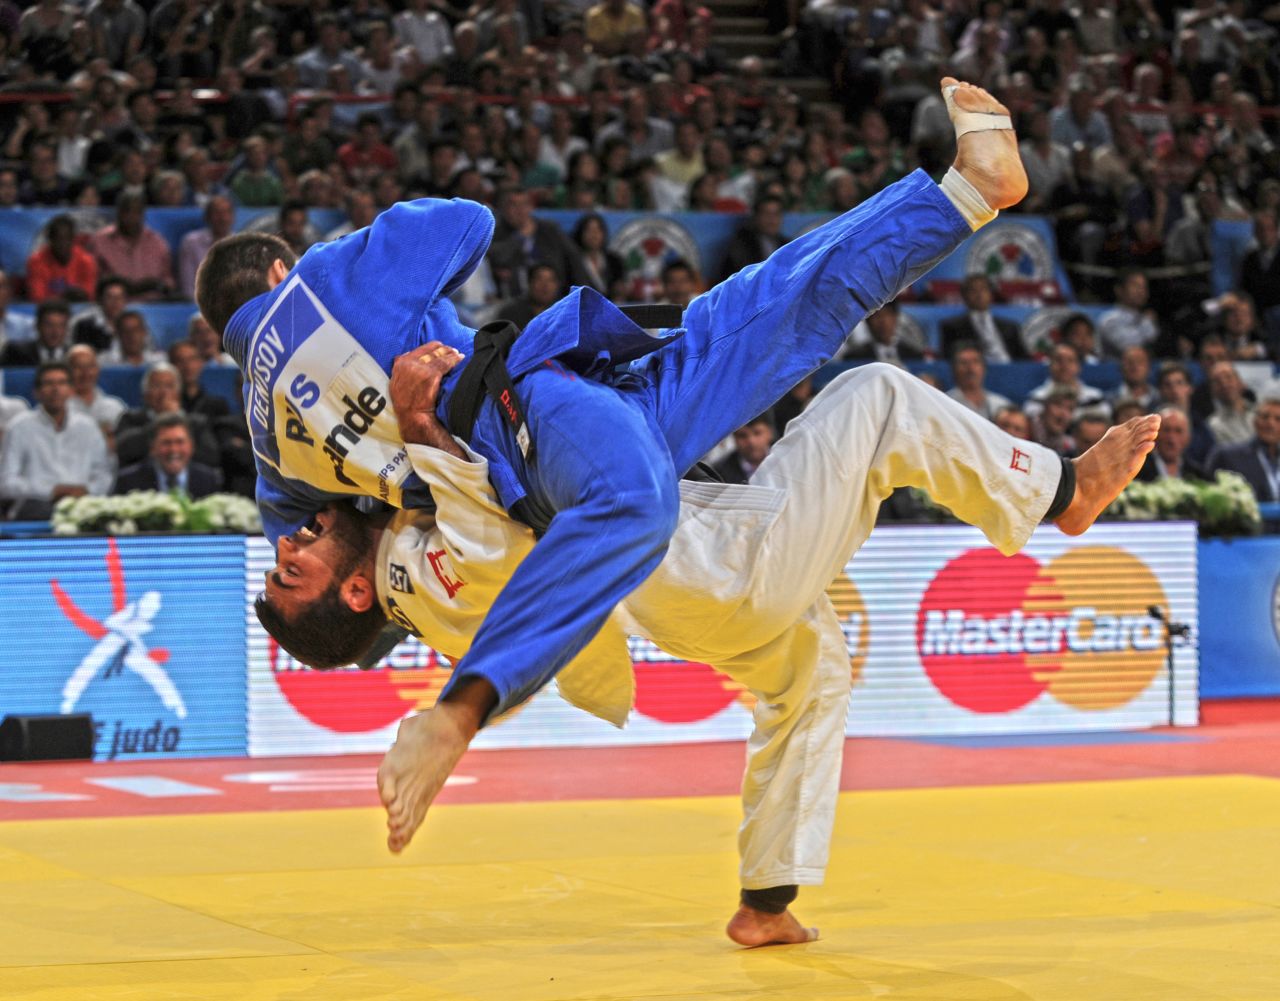 "I have been a judo fan all my life," says Willingham. "I was a volunteer at the Athens 2004 Olympics in the judo and watched Ilias Iliadis win Olympic gold at 17 years old (I was 16 at the time). So for me, it has been amazing to be able to document the ups and downs of his career so closely. He is one of the most spectacular judokas, when he's on the mat something extraordinary invariably happens! He is also one of my favorite judoka of all time. I have two shots of him that I particularly like. This is at the 2011 World Championships in Paris, which he would go on to win to become a double world champion. In the semifinal against one of his great rivals Kiril Denisov, he threw with this incredible Ura Nage for ippon to put him into the final."